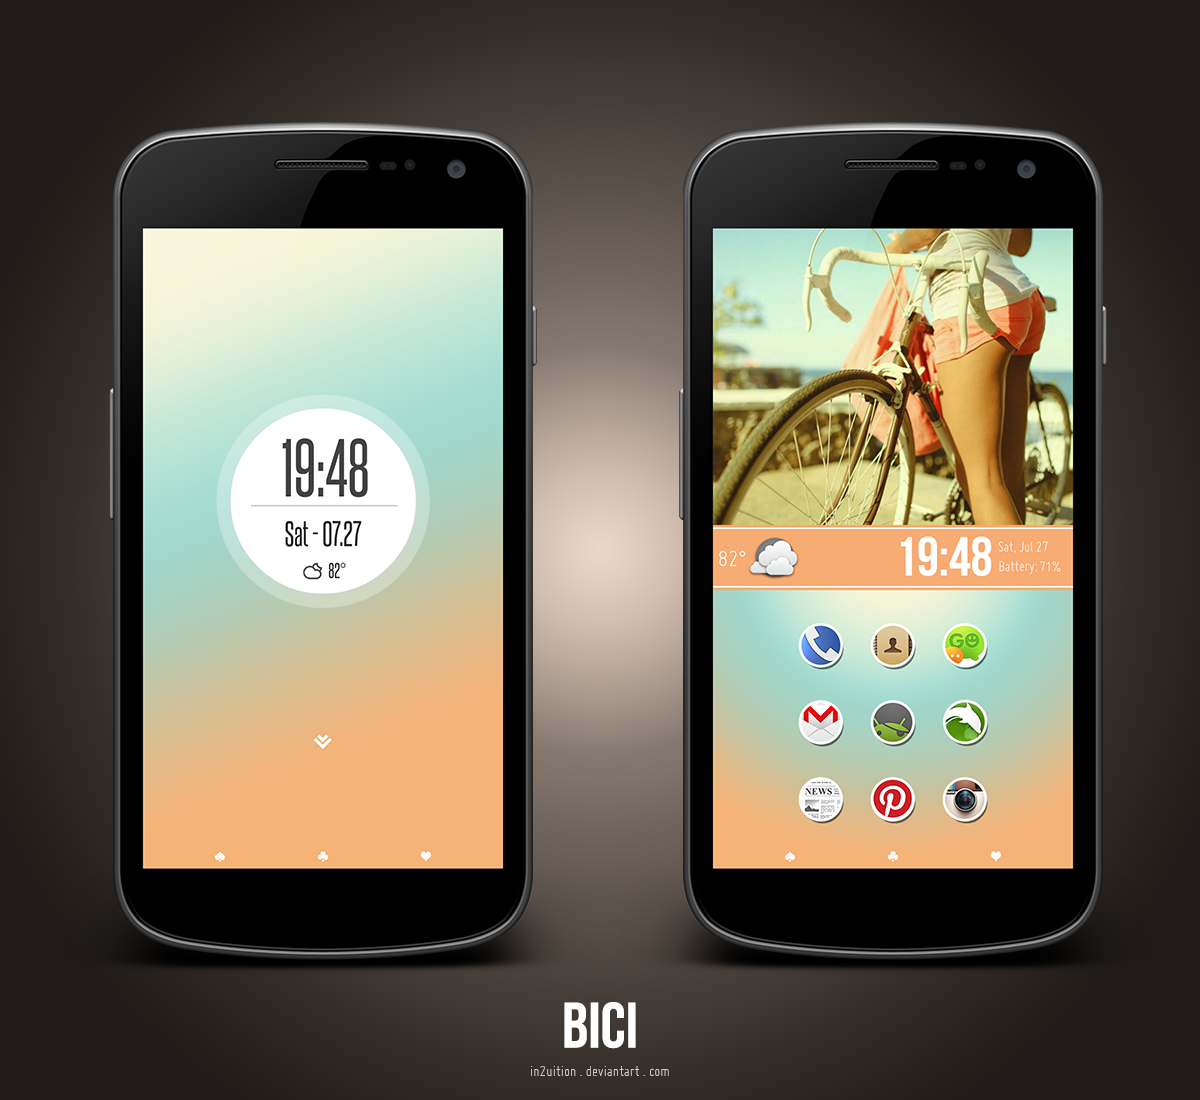 bici_by_in2uition-d6fh6o2.png